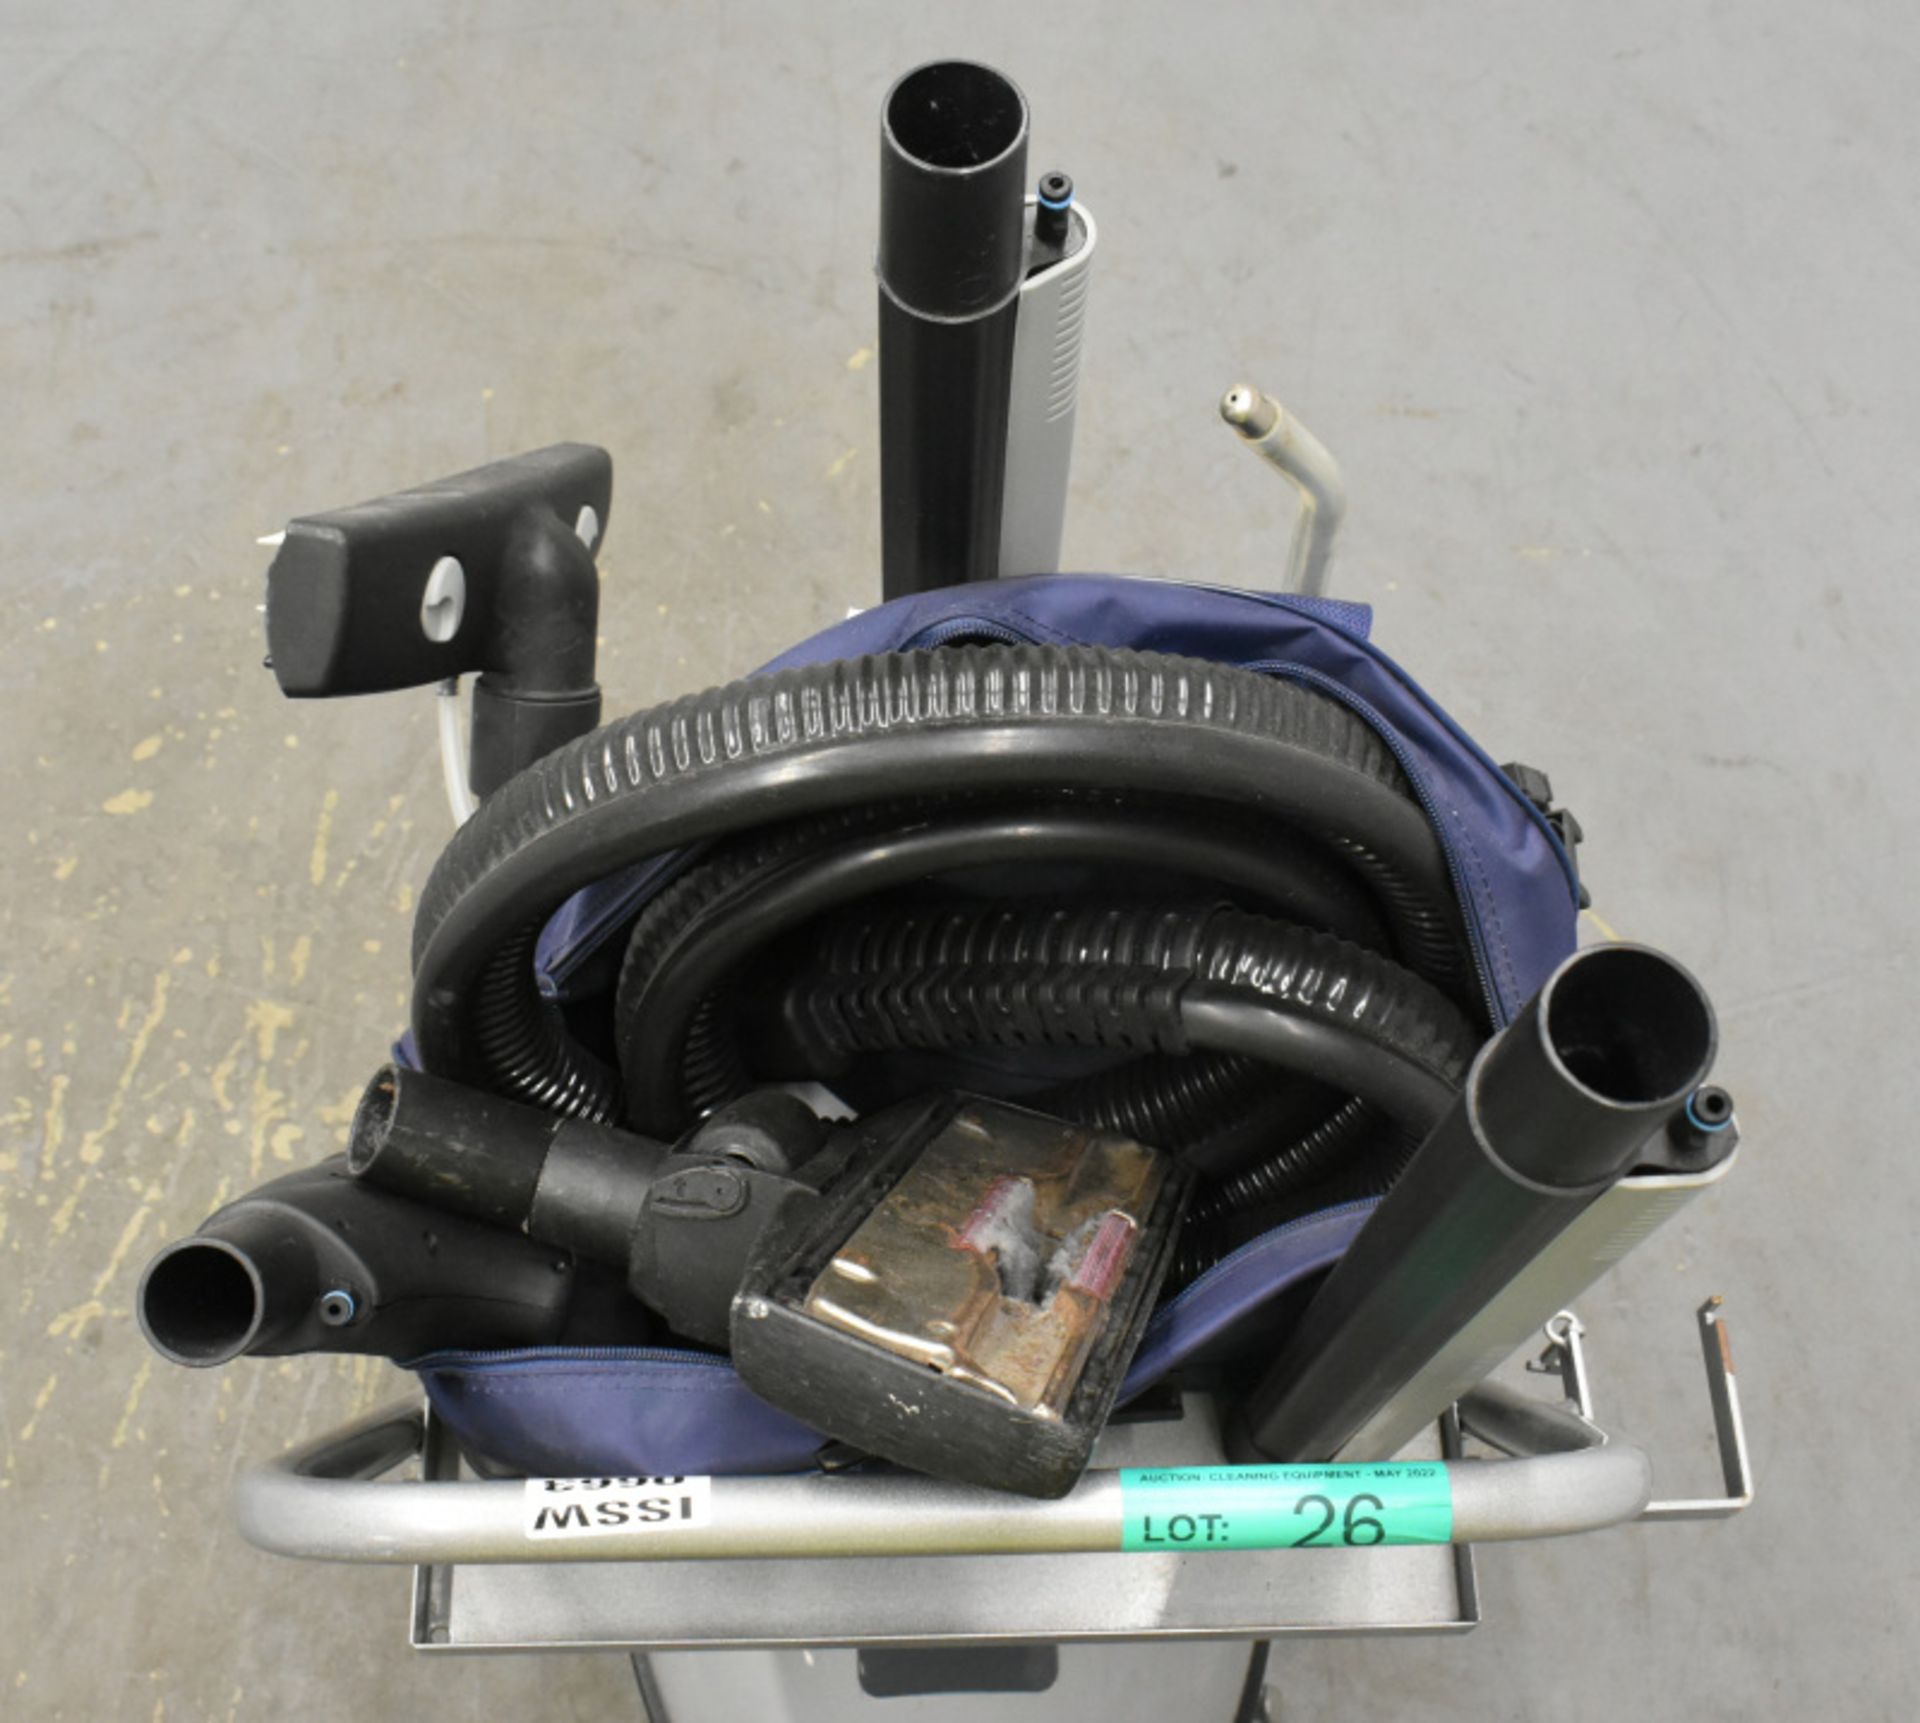 KS Group Steam Cleaner, Model- 3000, With attatchments - Image 4 of 4